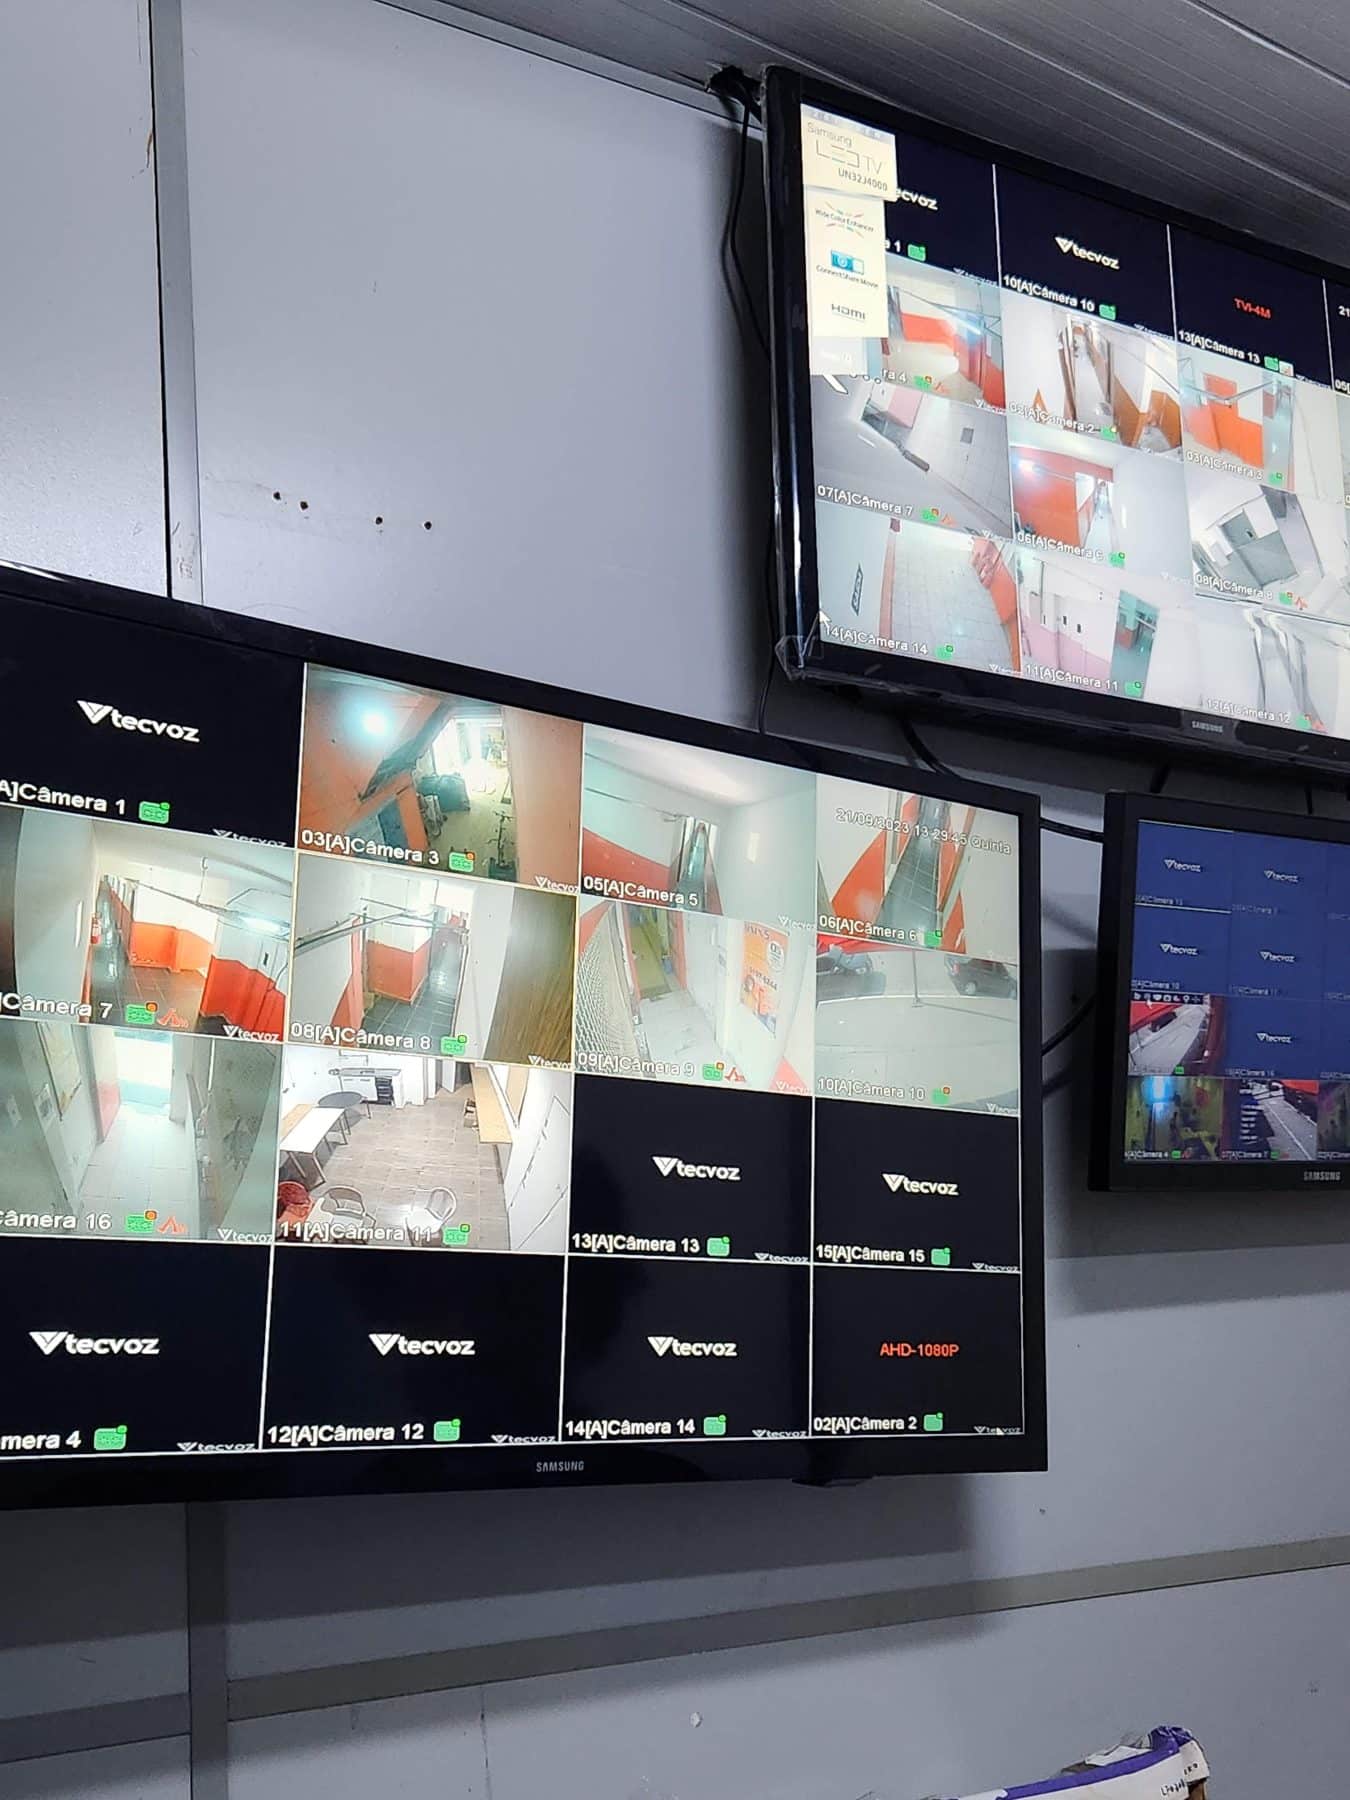 Two screens show multiple security camera views of the interior of a building. Photo by Roshan Abraham